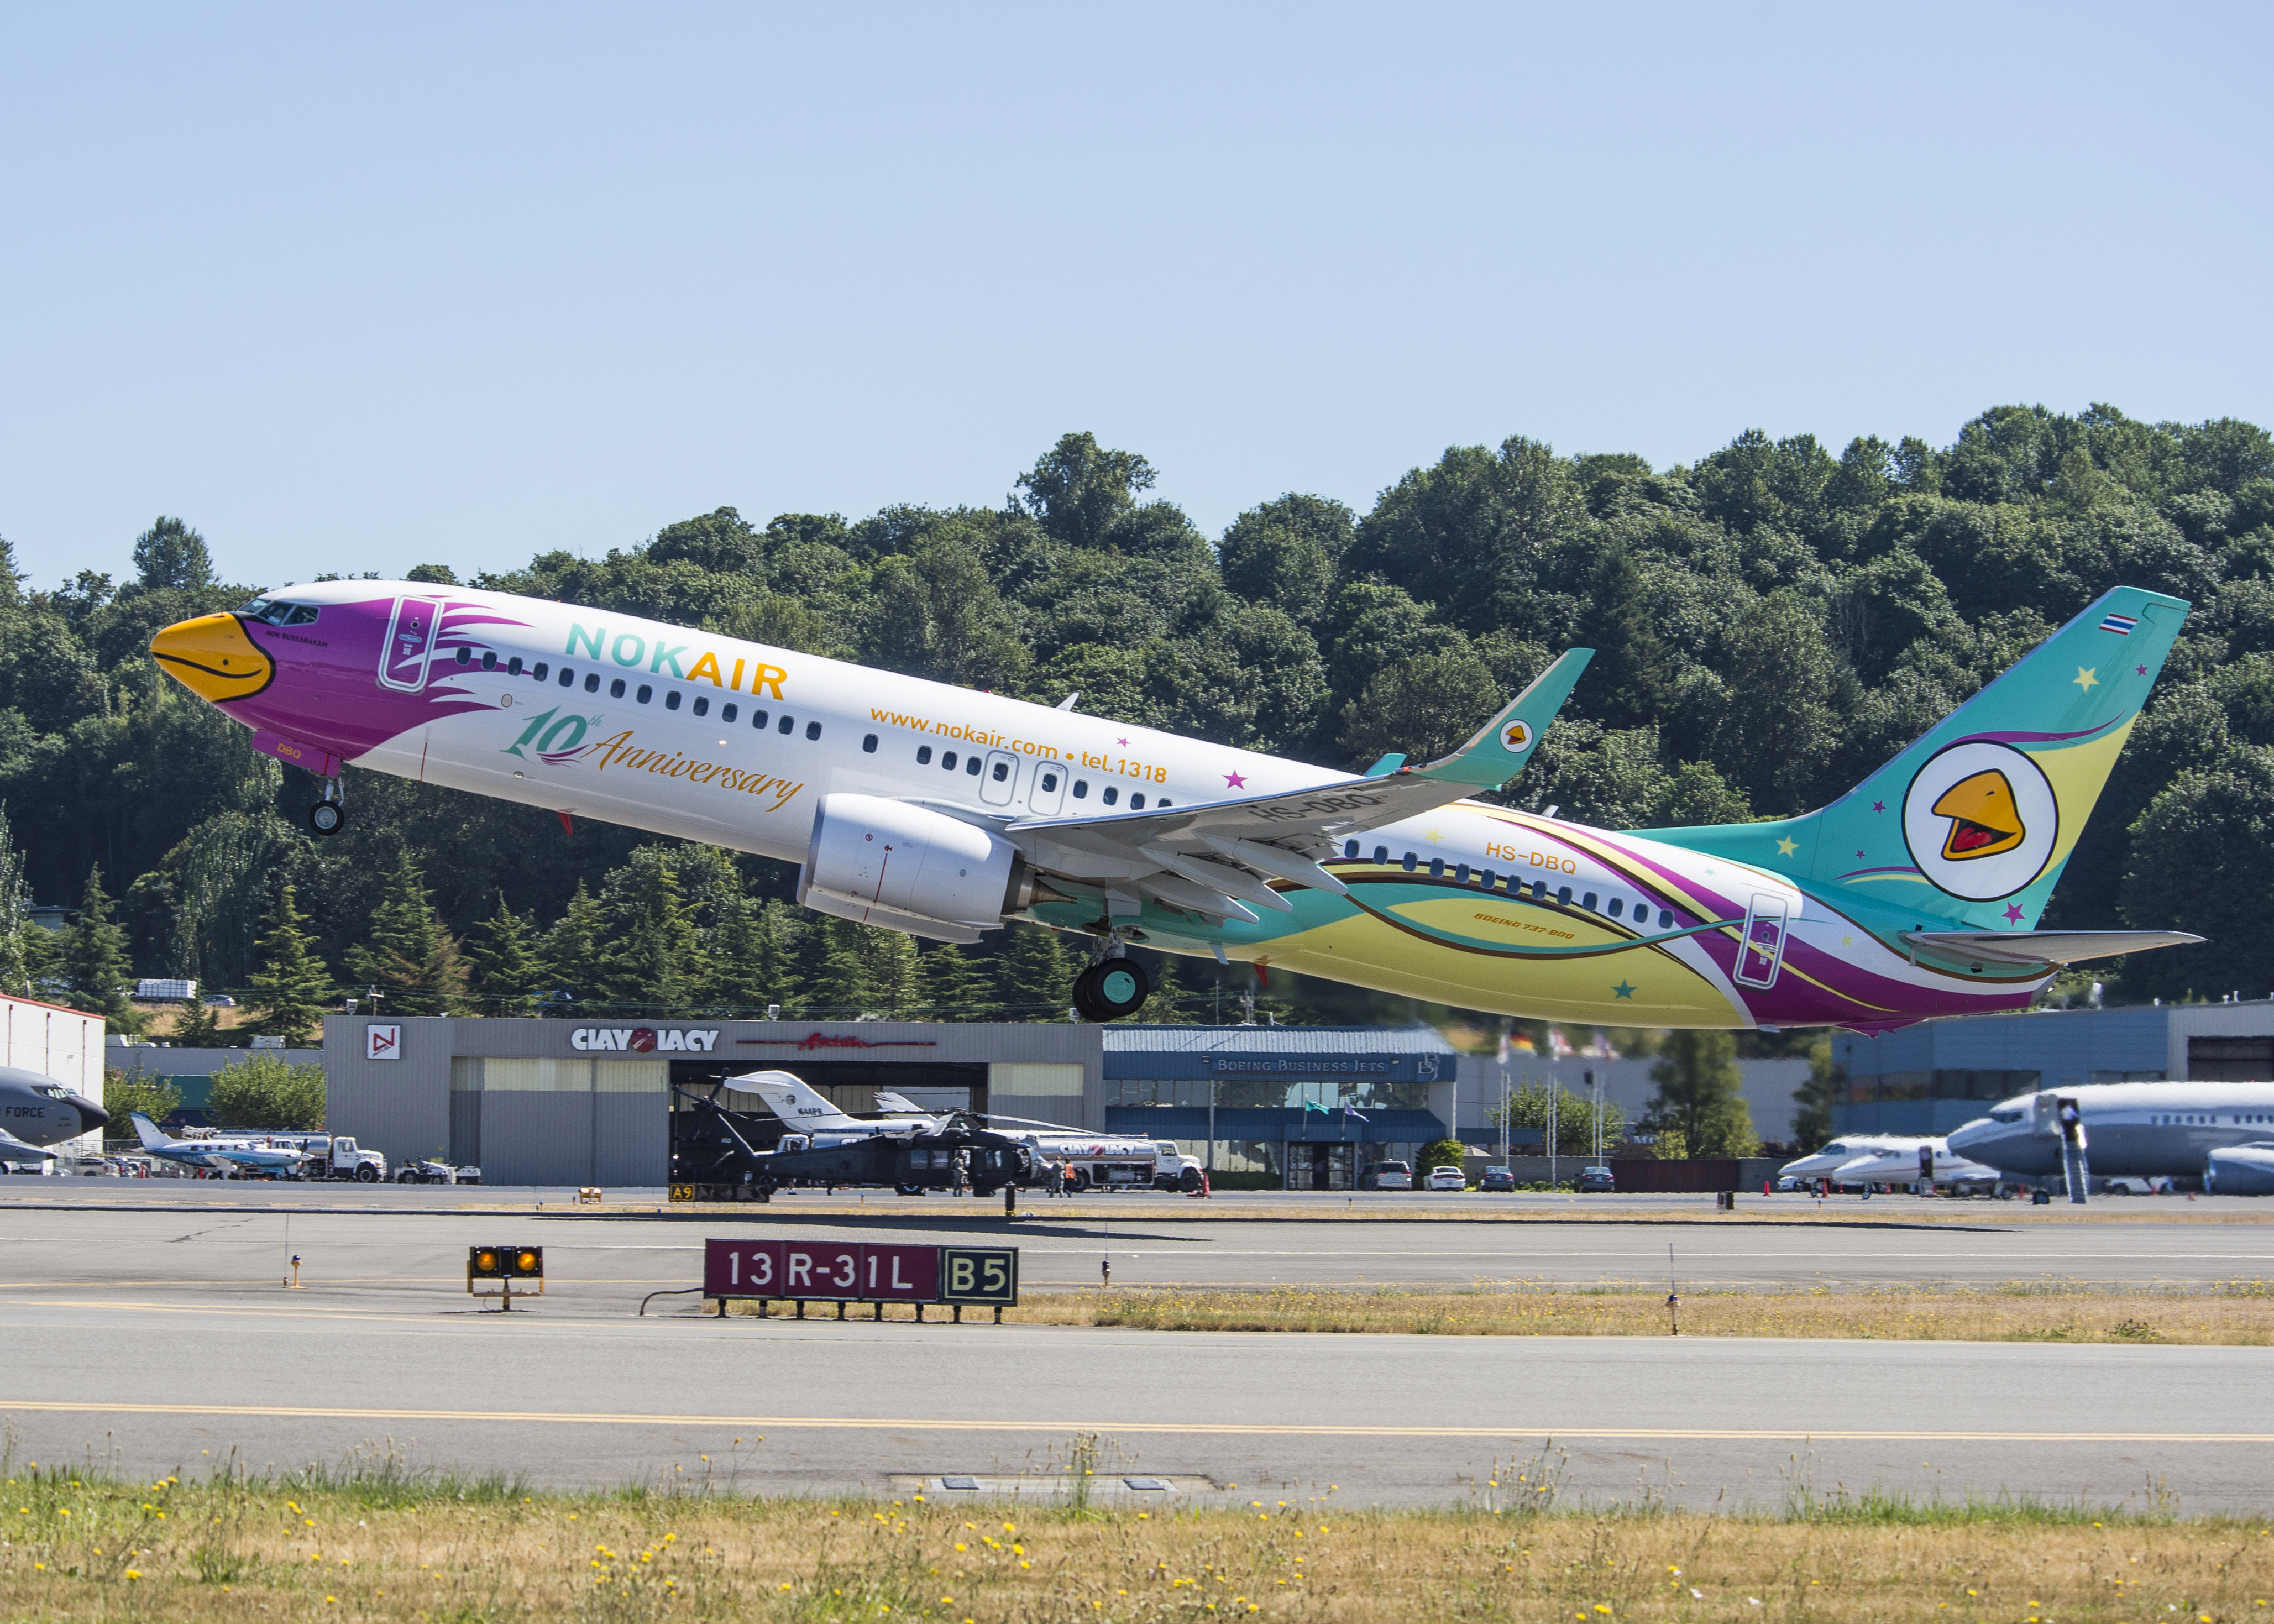 Nok Air's brand new 737-800 takes off from Boeing Field in Seattle - Photo: Boeing